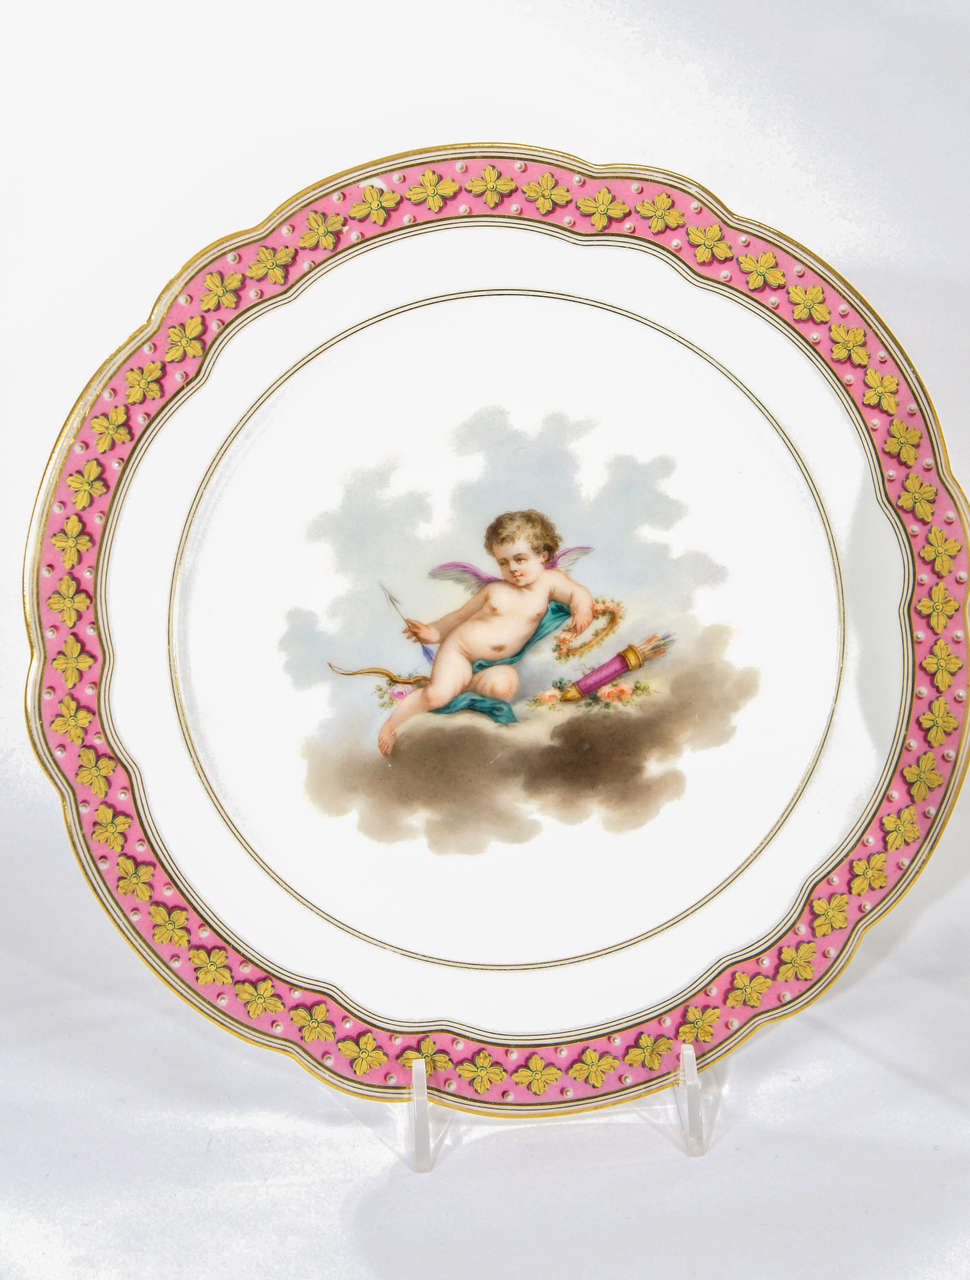 Set of 10 Choisy Sevres-Style Cabinet Plates With Putti 1